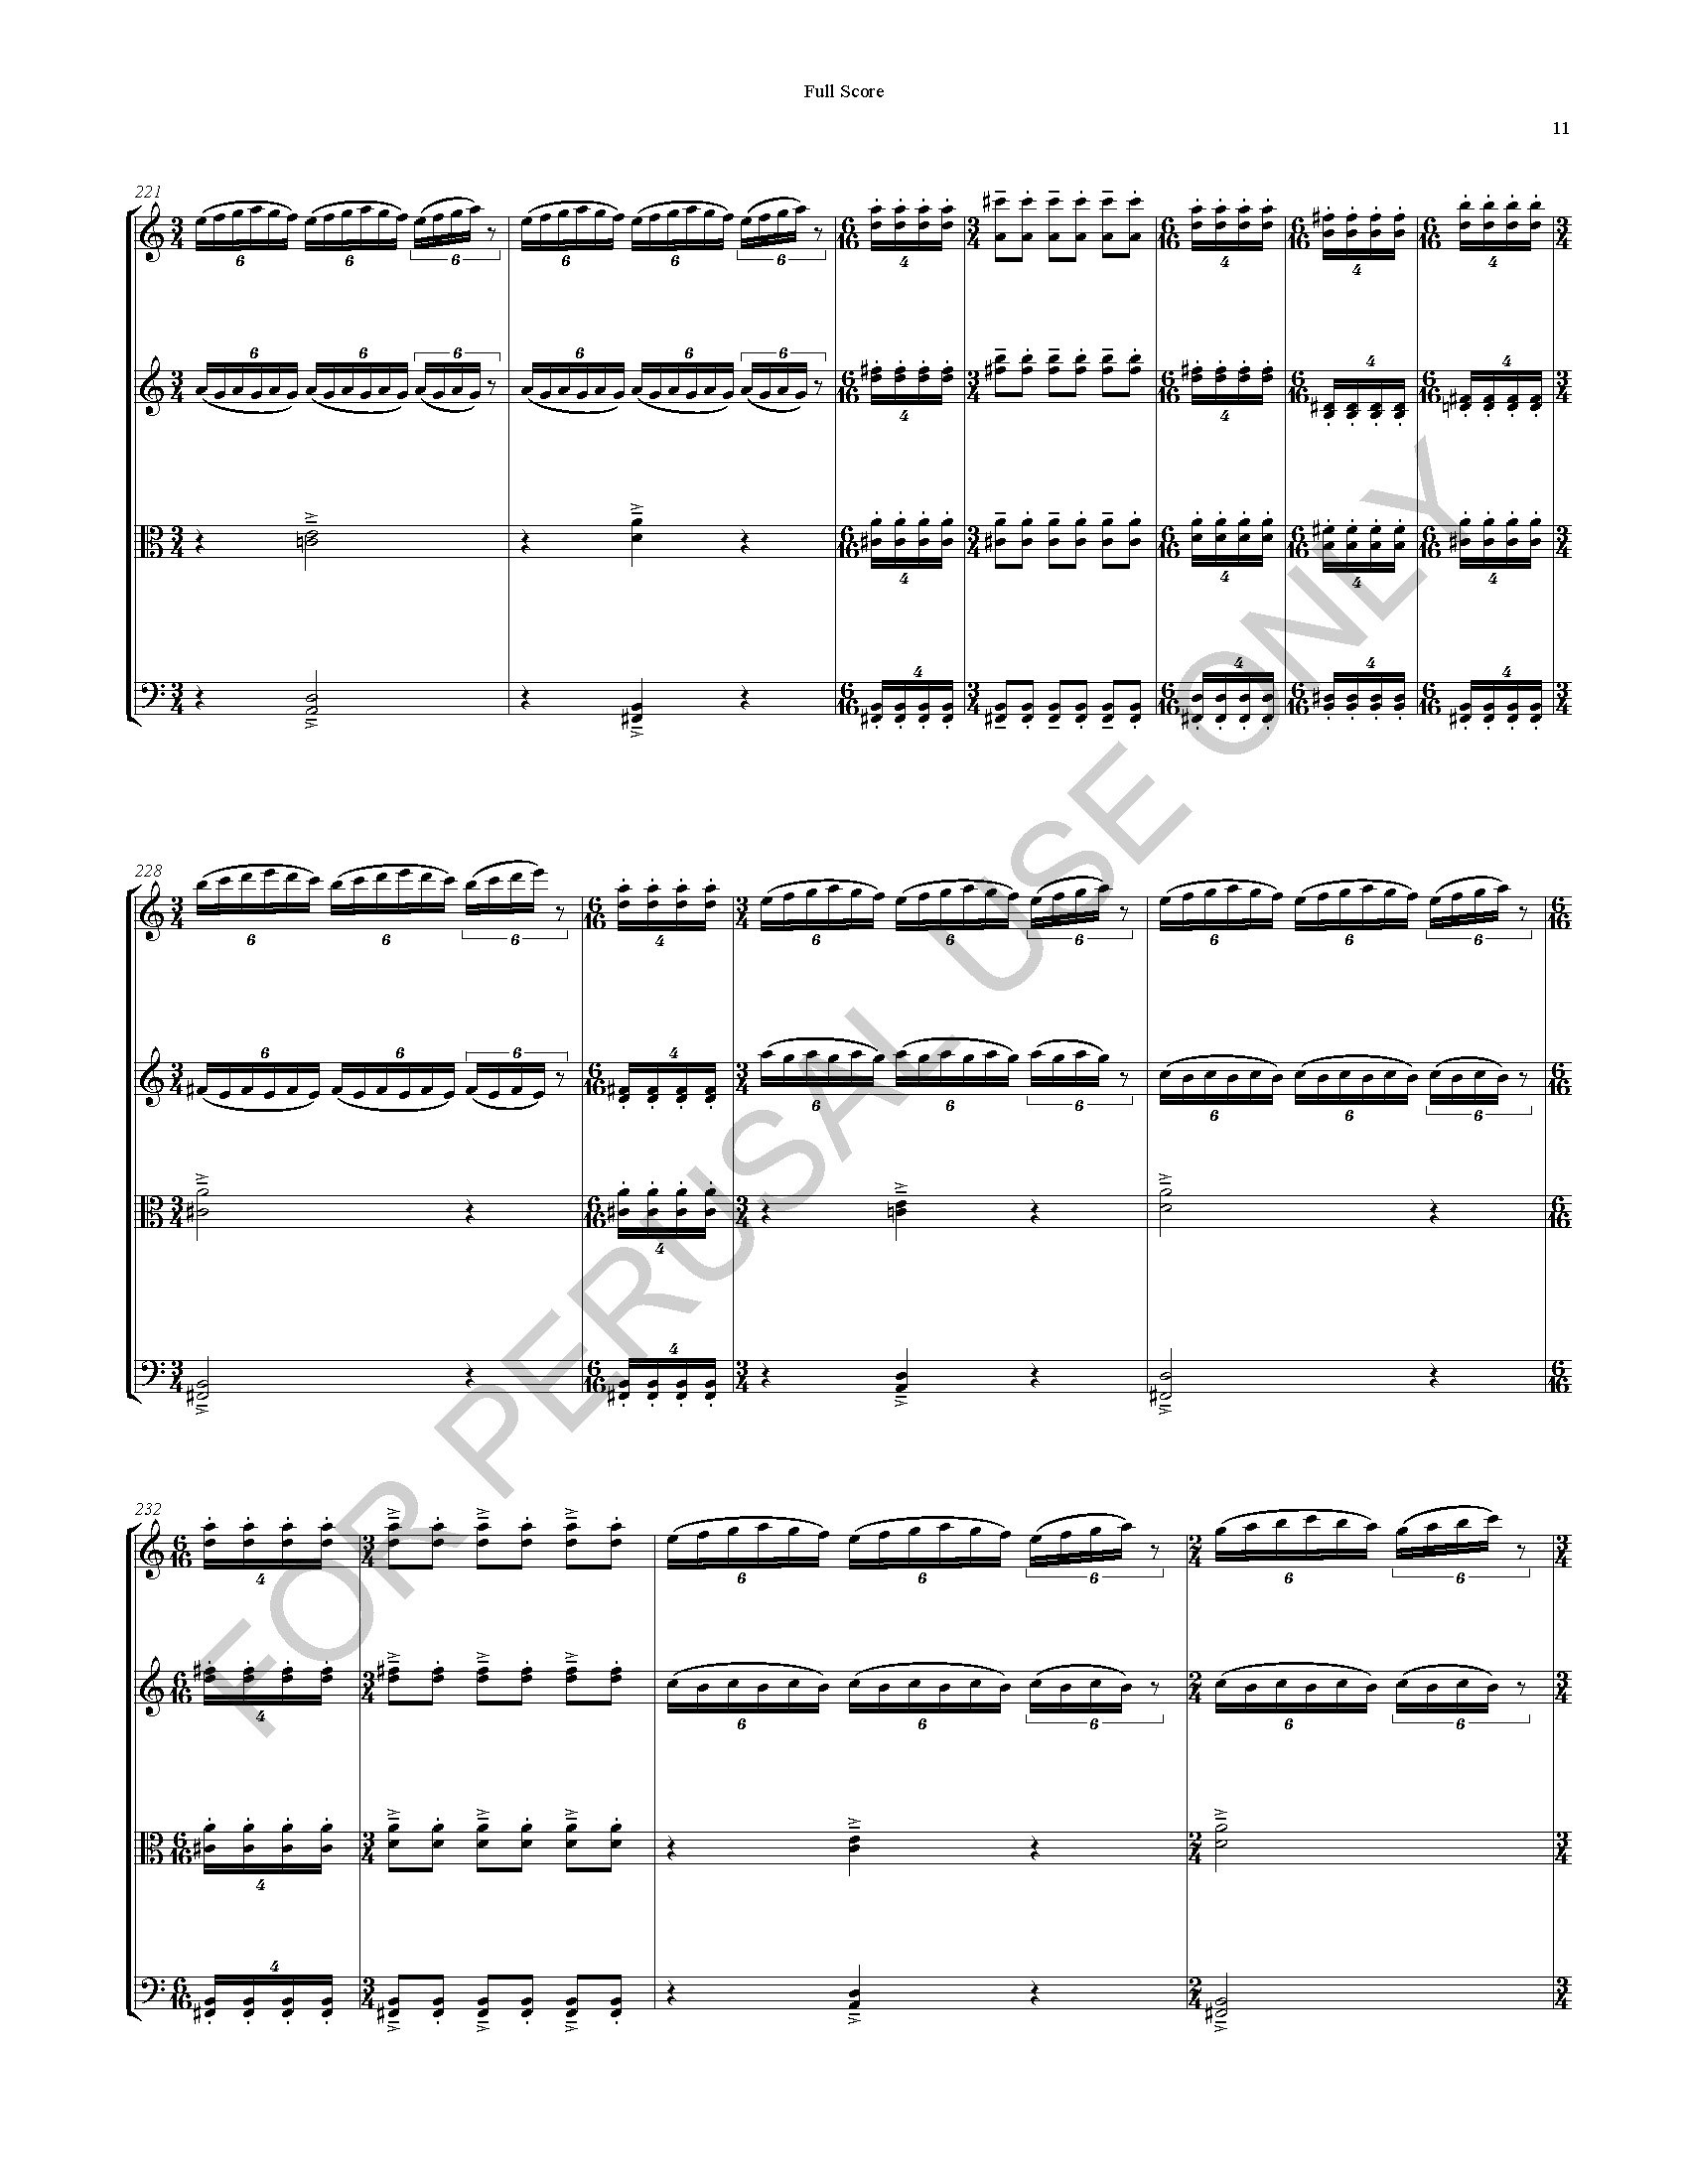 REFERENCE Smear Music (Full Score)_Page_11.jpg